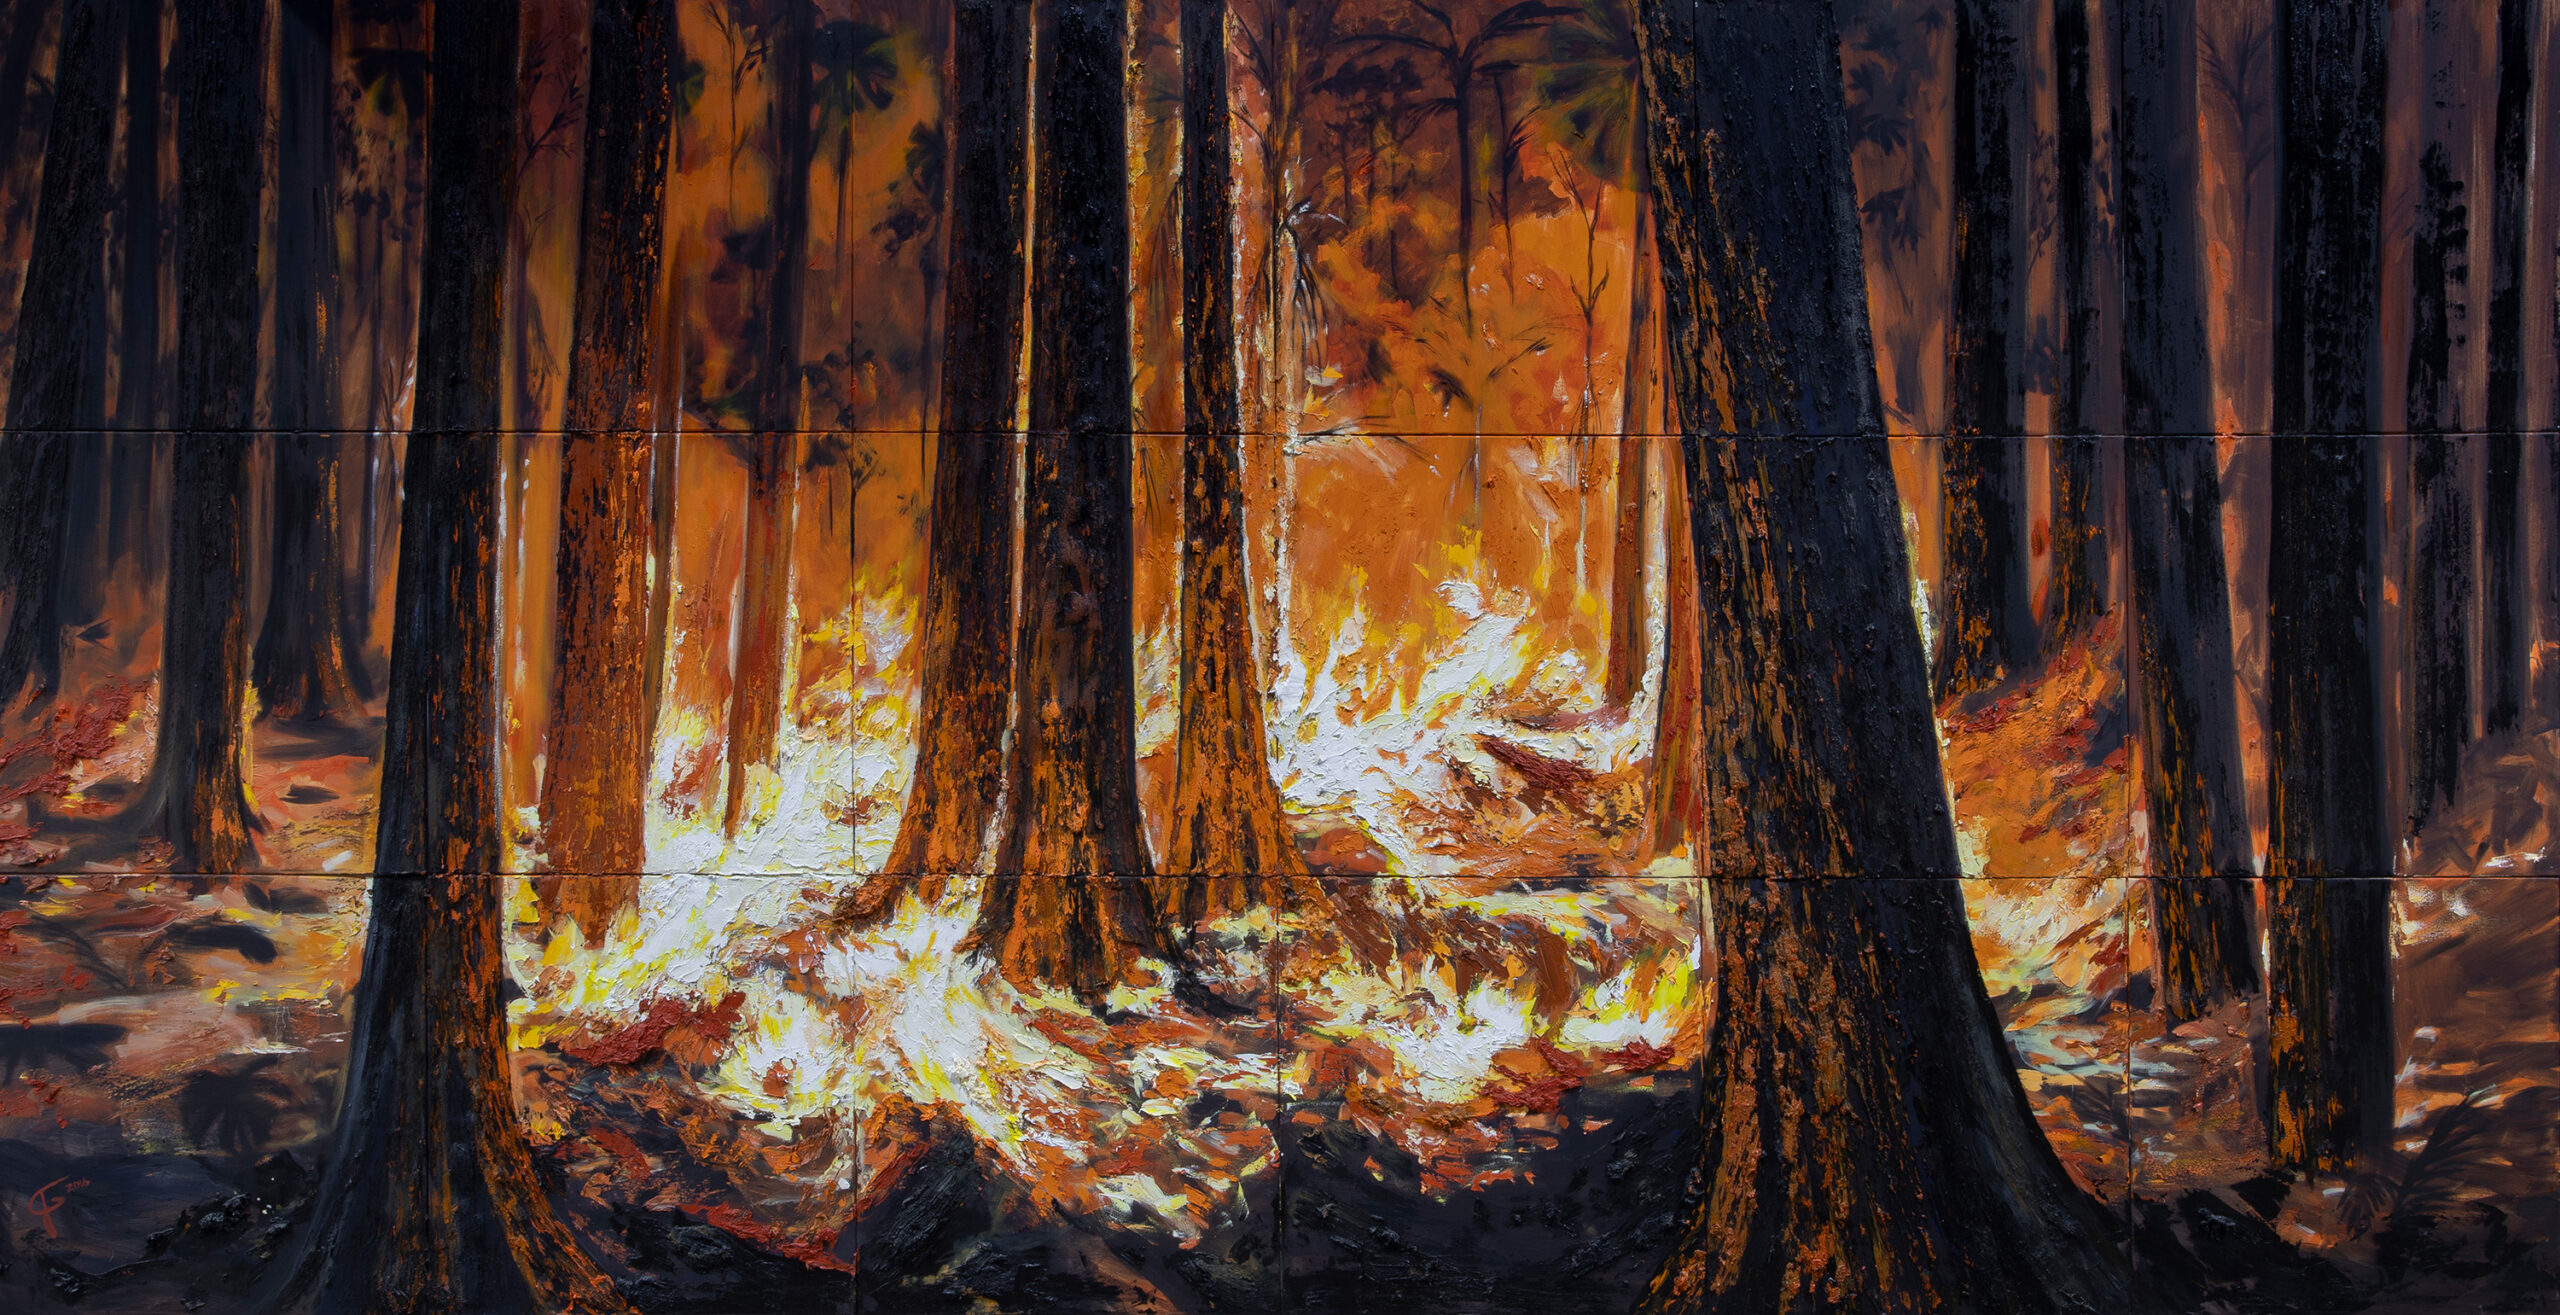 Jacqueline Gilmore (American, 21st century), <em>Ashes to Ashes</em>, 2016, oil on canvas, 90″ x 180″.